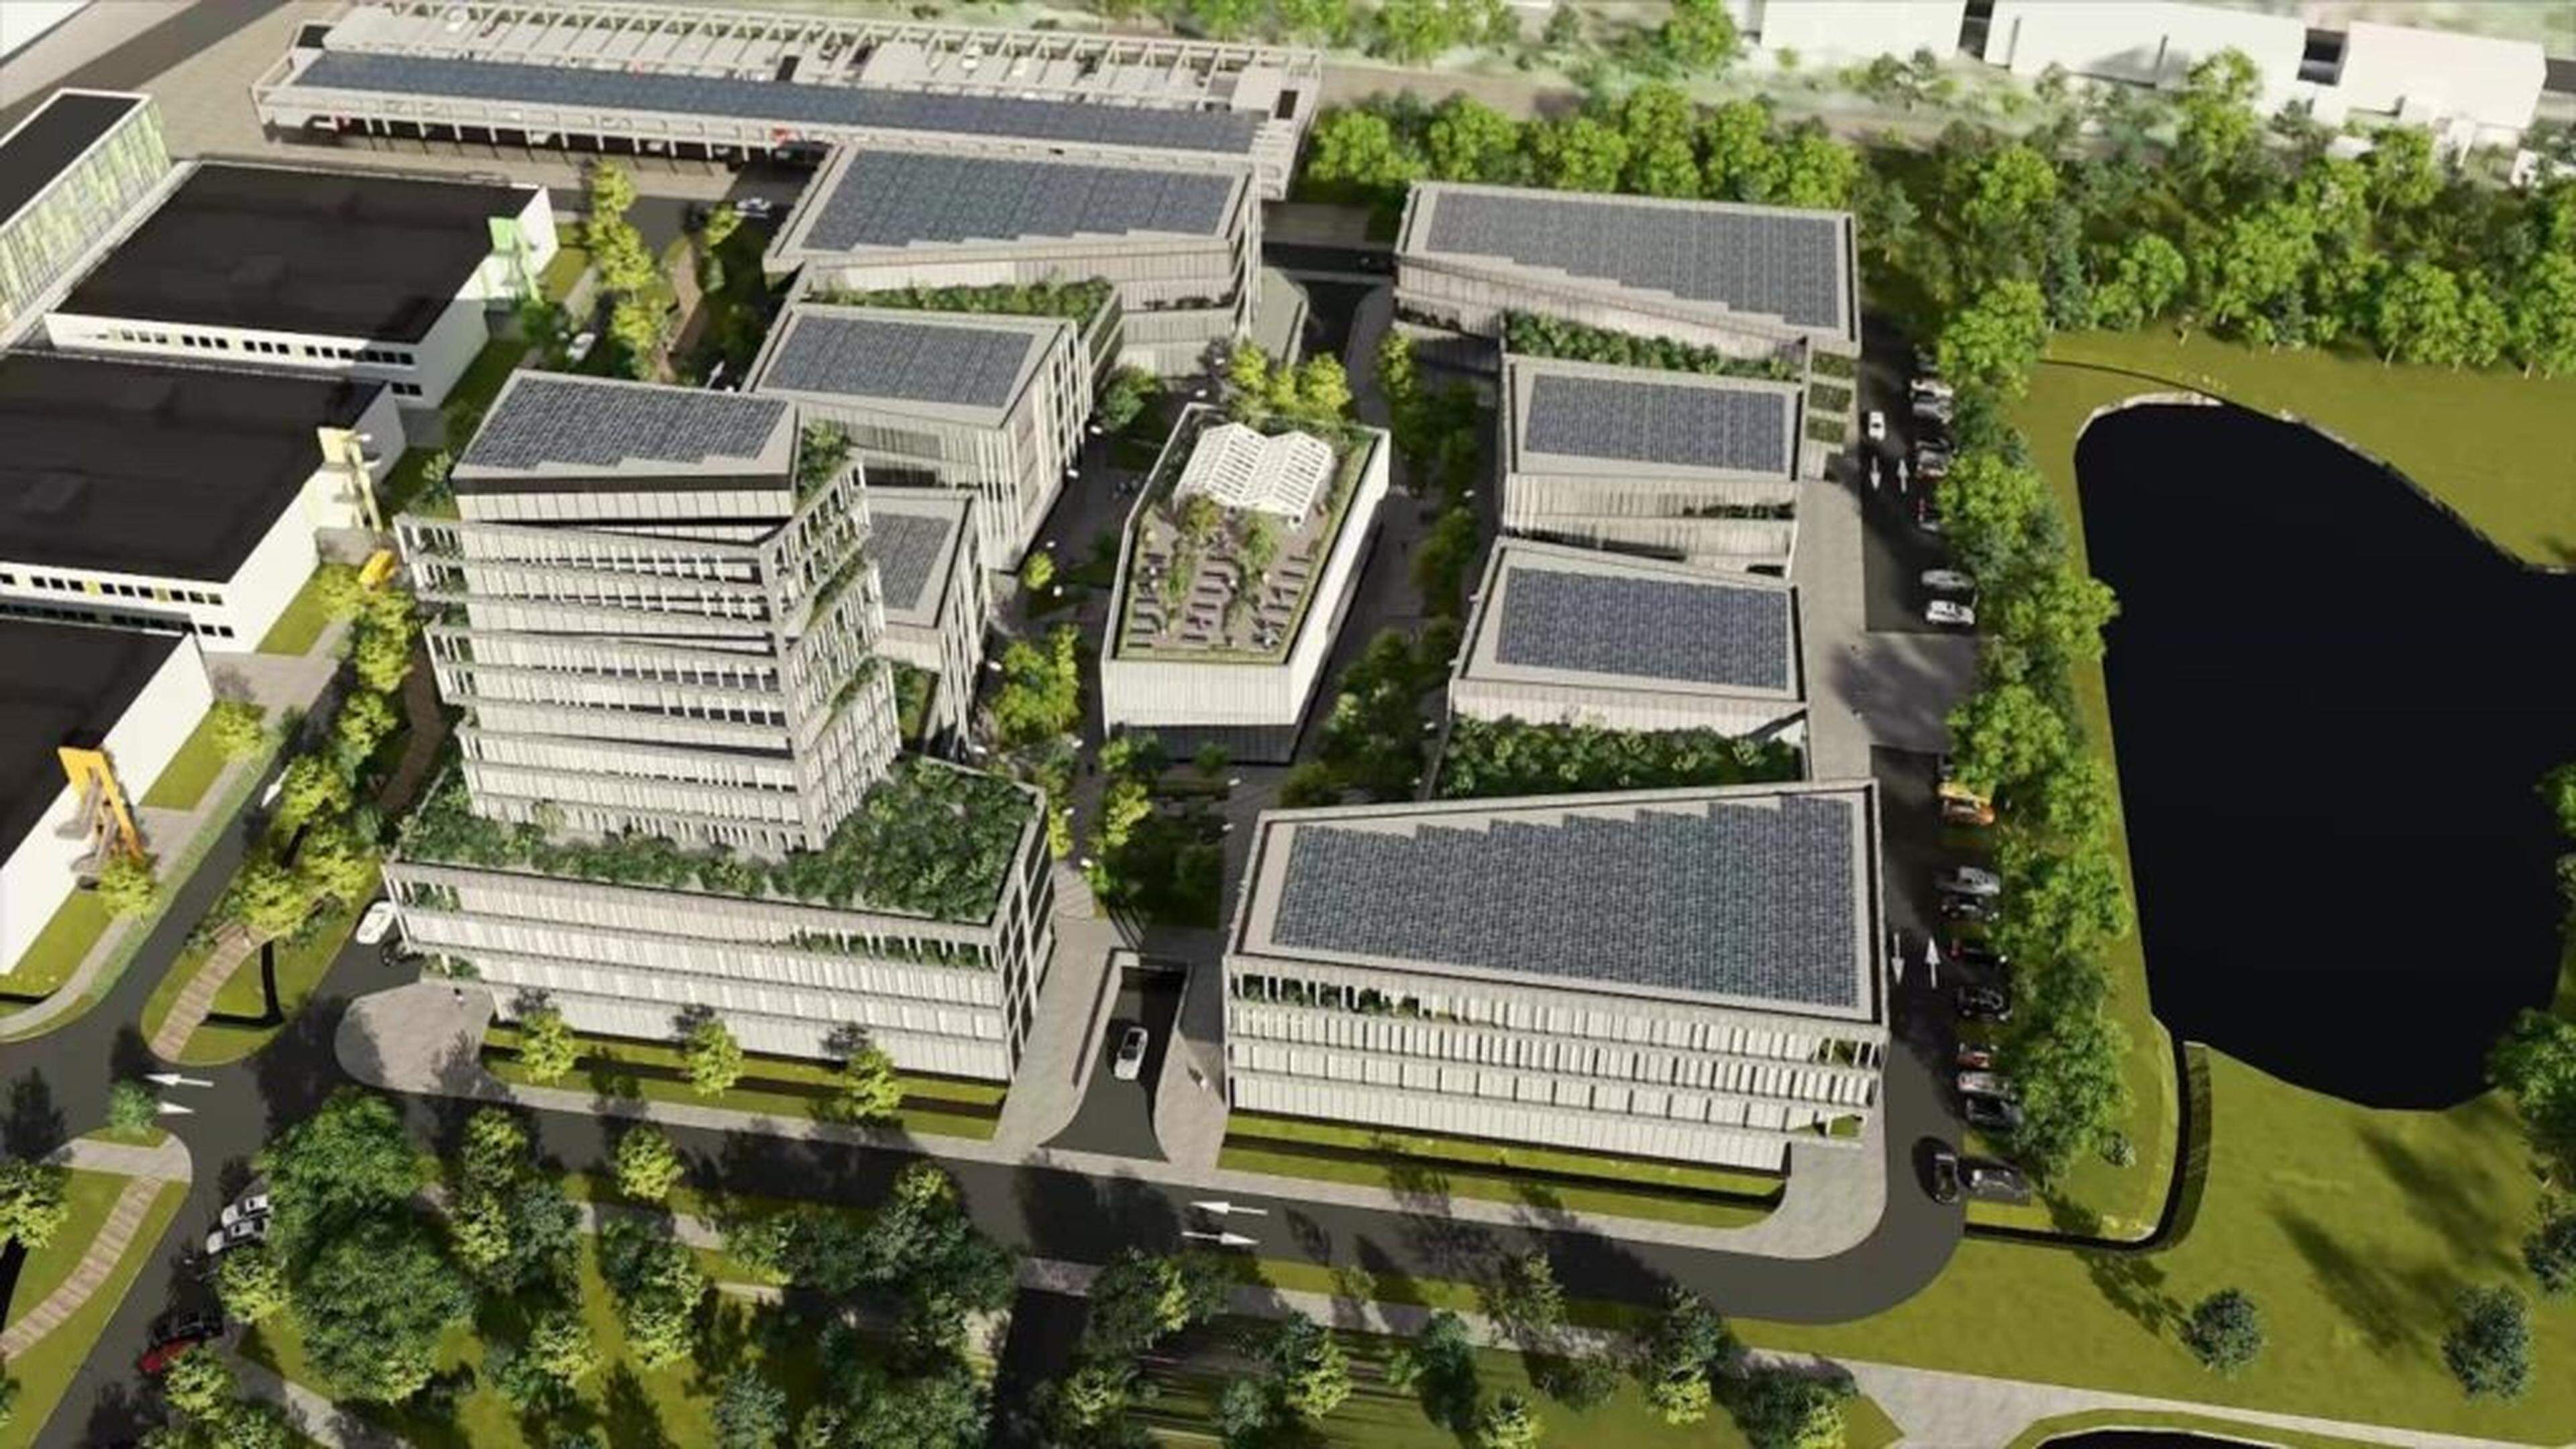 The future HE:AL health tech campus will emerge around the House of BioHealth in Belval, where the University of Luxembourg and other research centres are already based